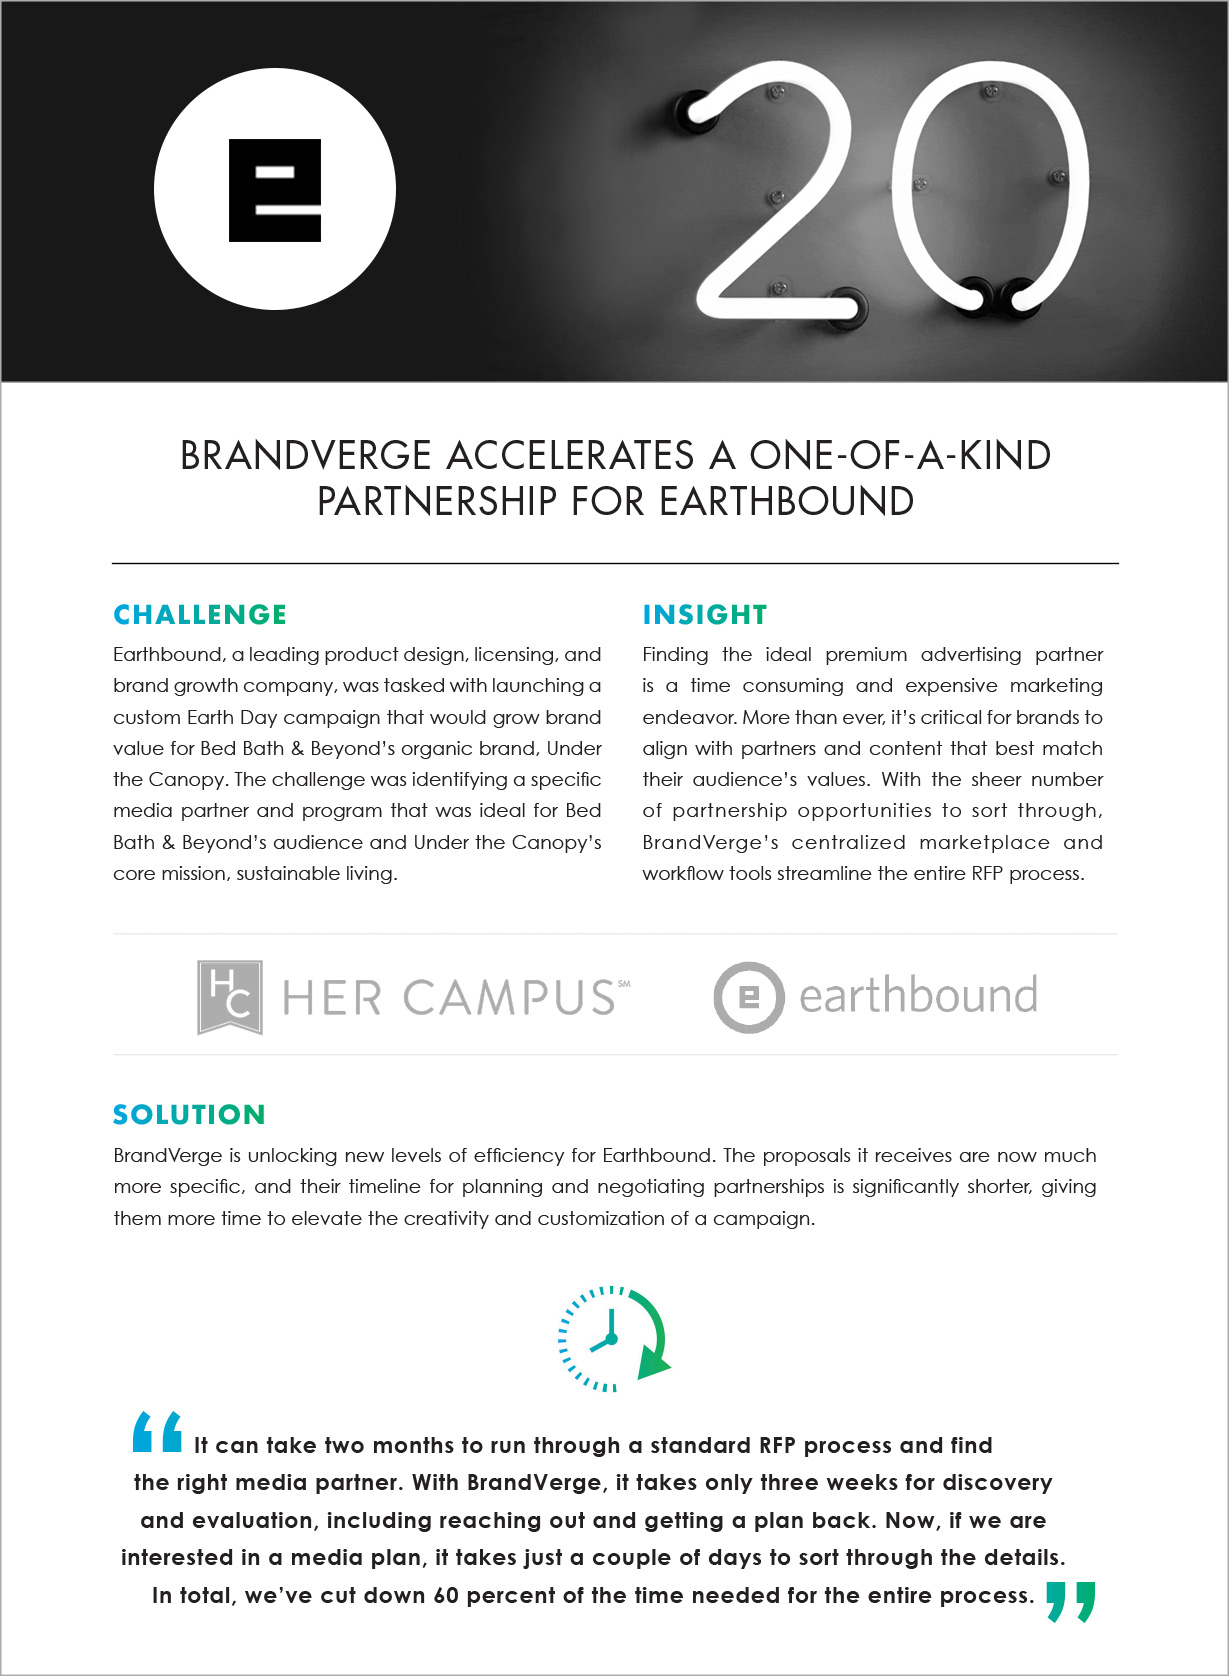 BRANDVERGE ACCELERATES A ONE-OF-A-KIND PARTNERSHIP FOR EARTHBOUND